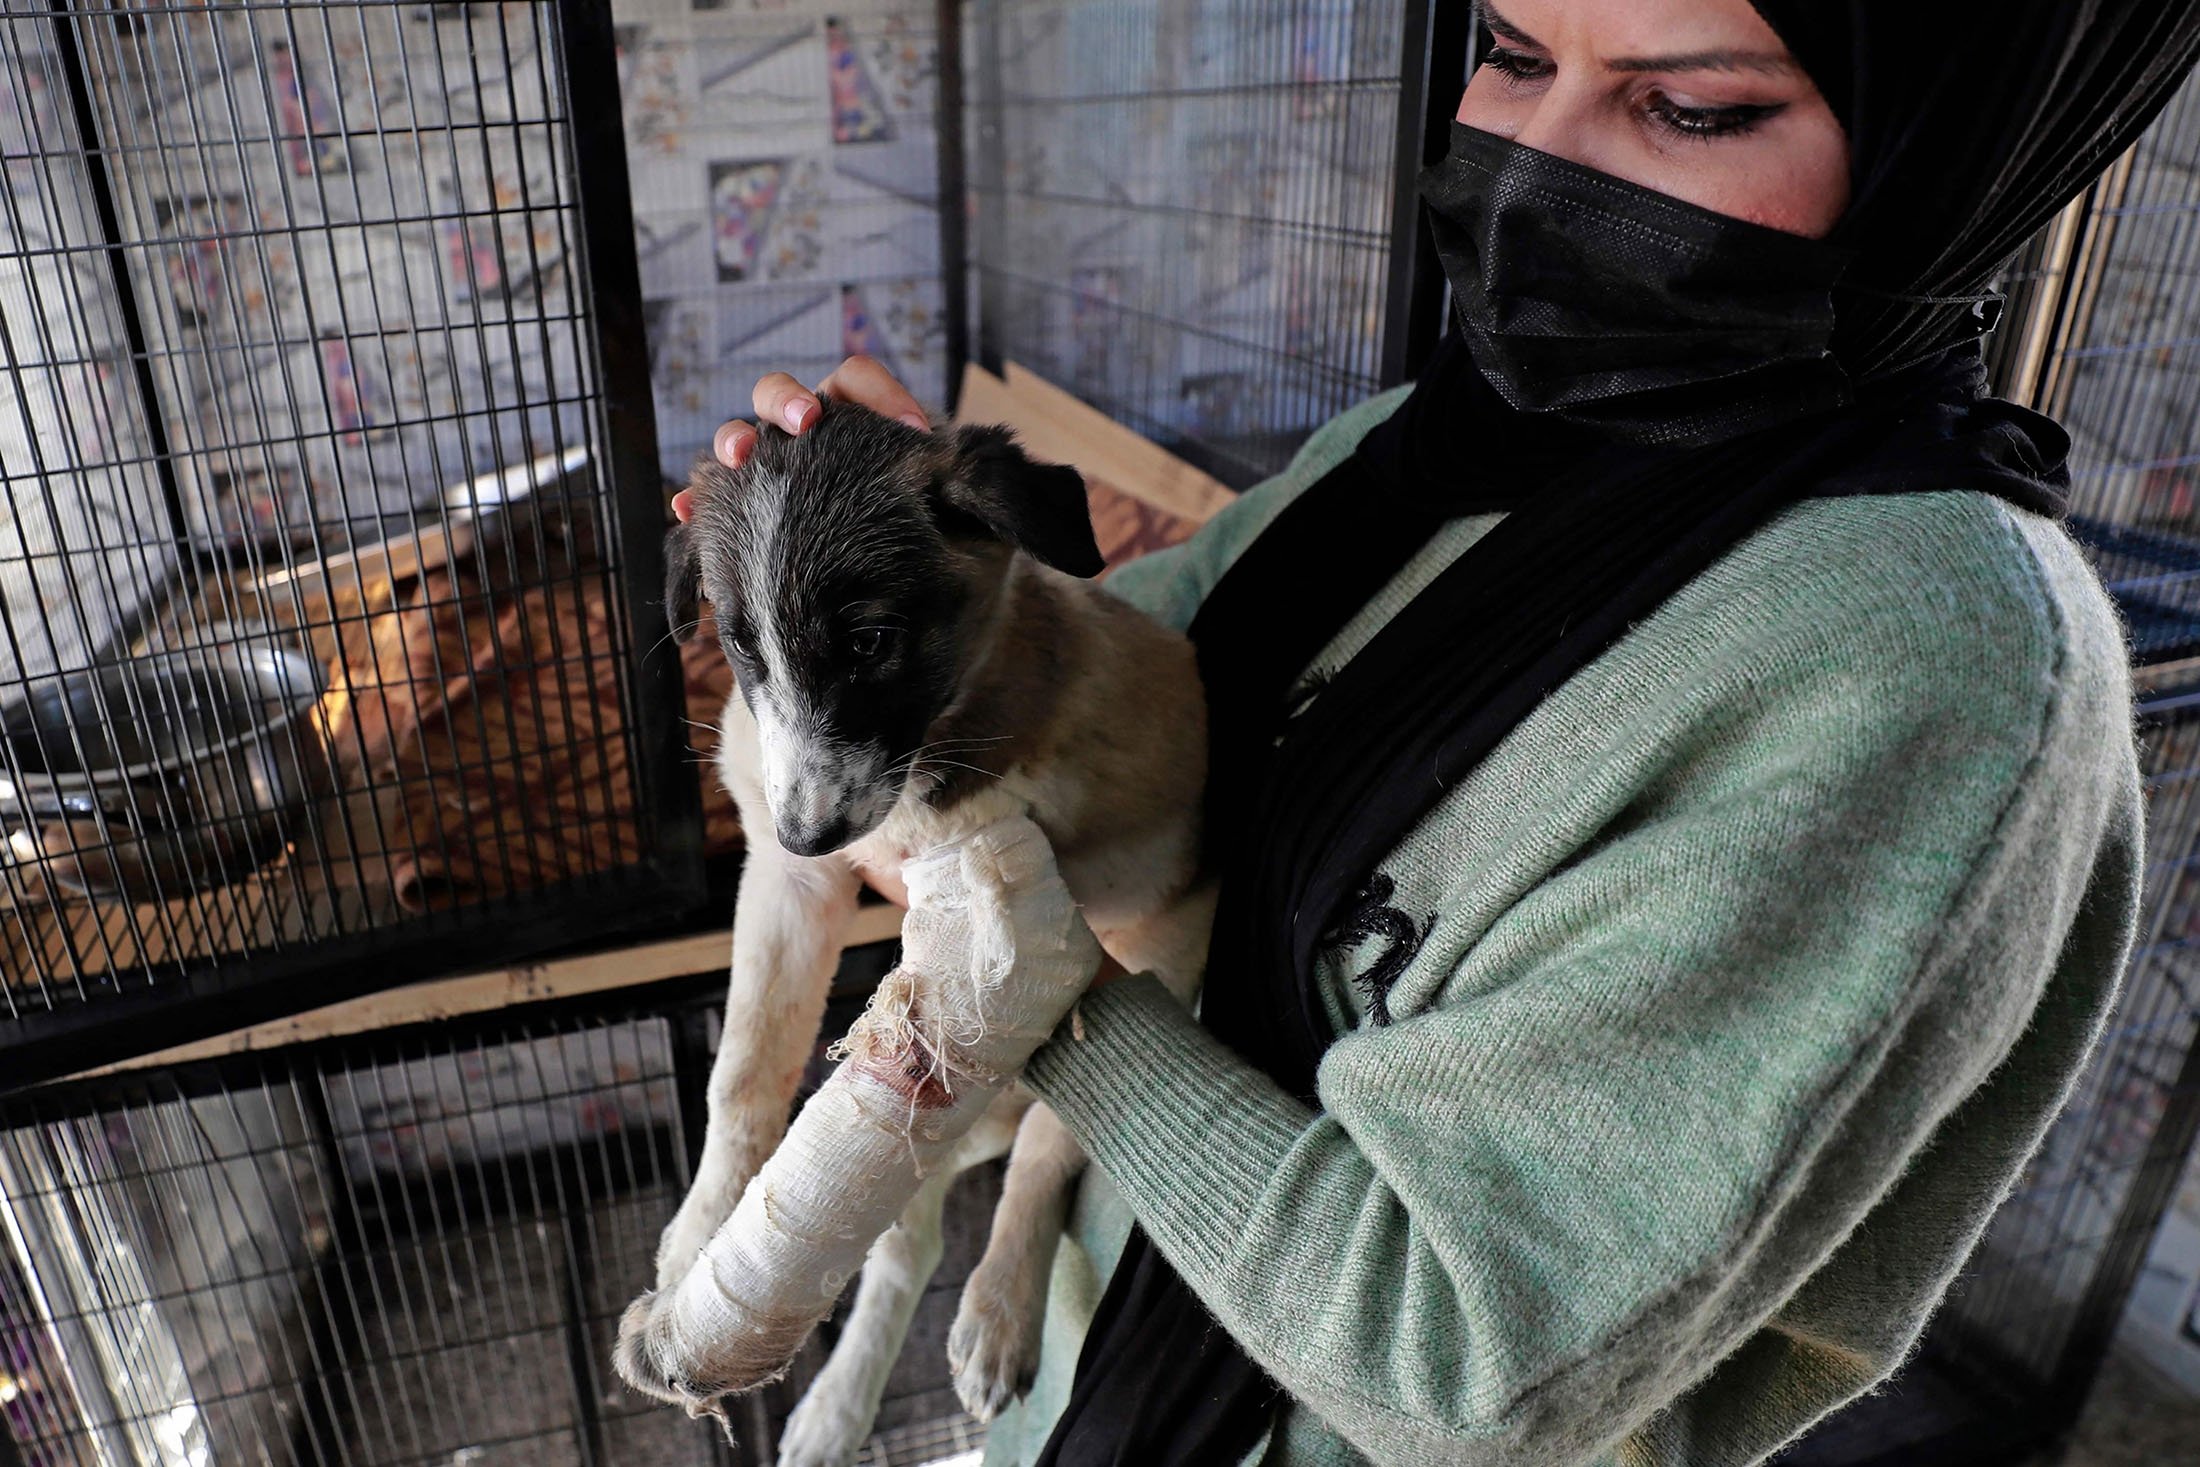 A volunteer veterinarian at the Baghdad Animal Rescue holds an injured dog at the shelter, west of the capital Baghdad, Iraq, January 16, 2022. (AFP Photo)